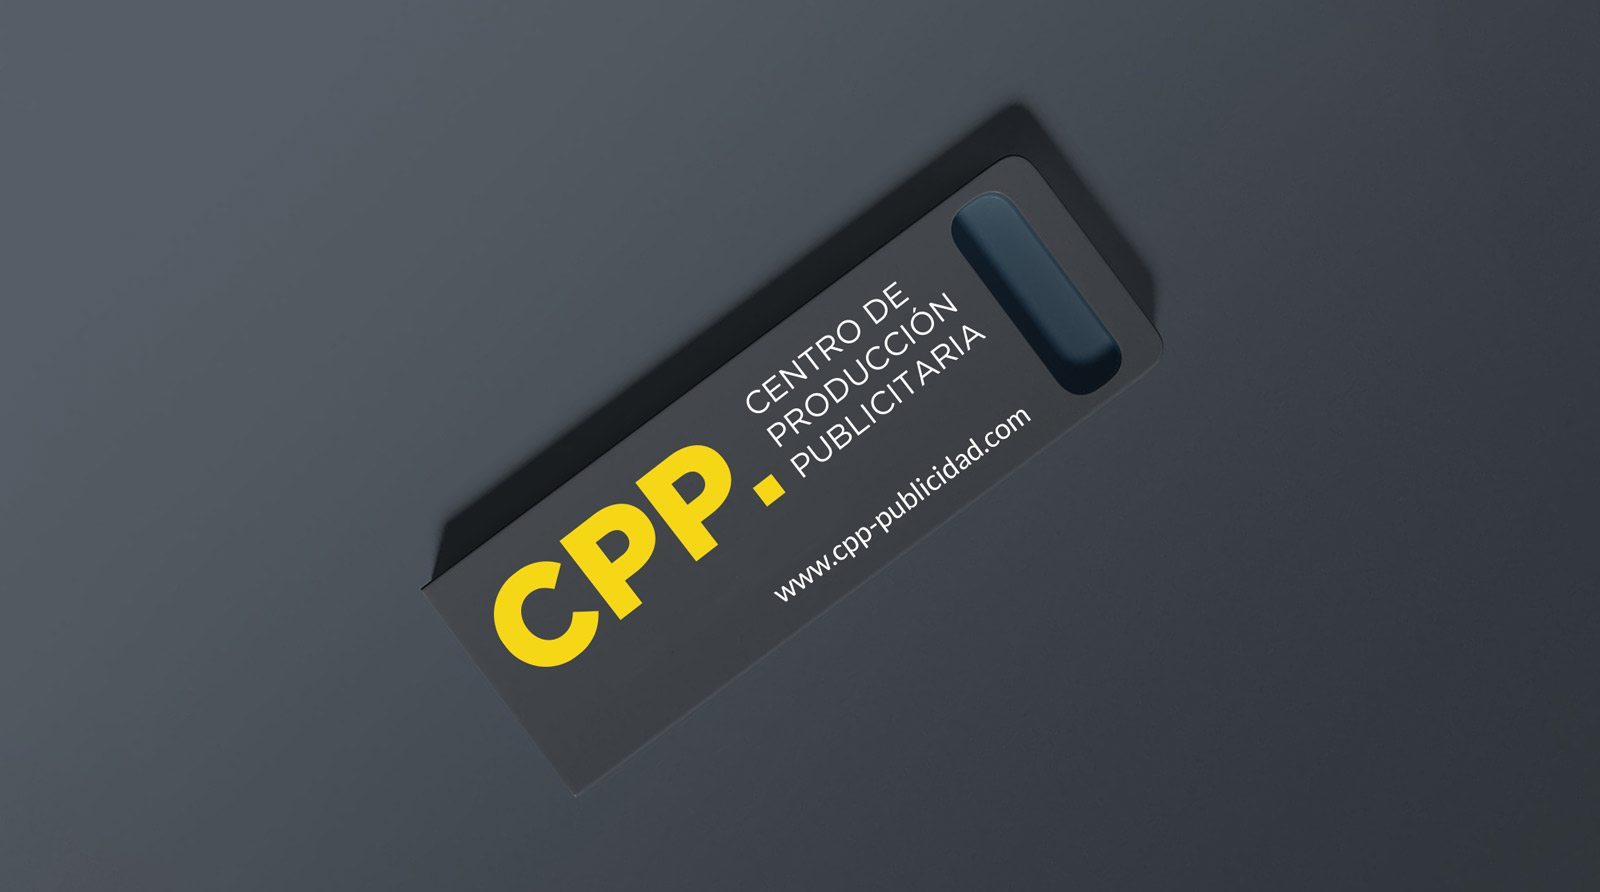 Graphic and creative design of logo restyling and branding for a CPP advertising agency brand